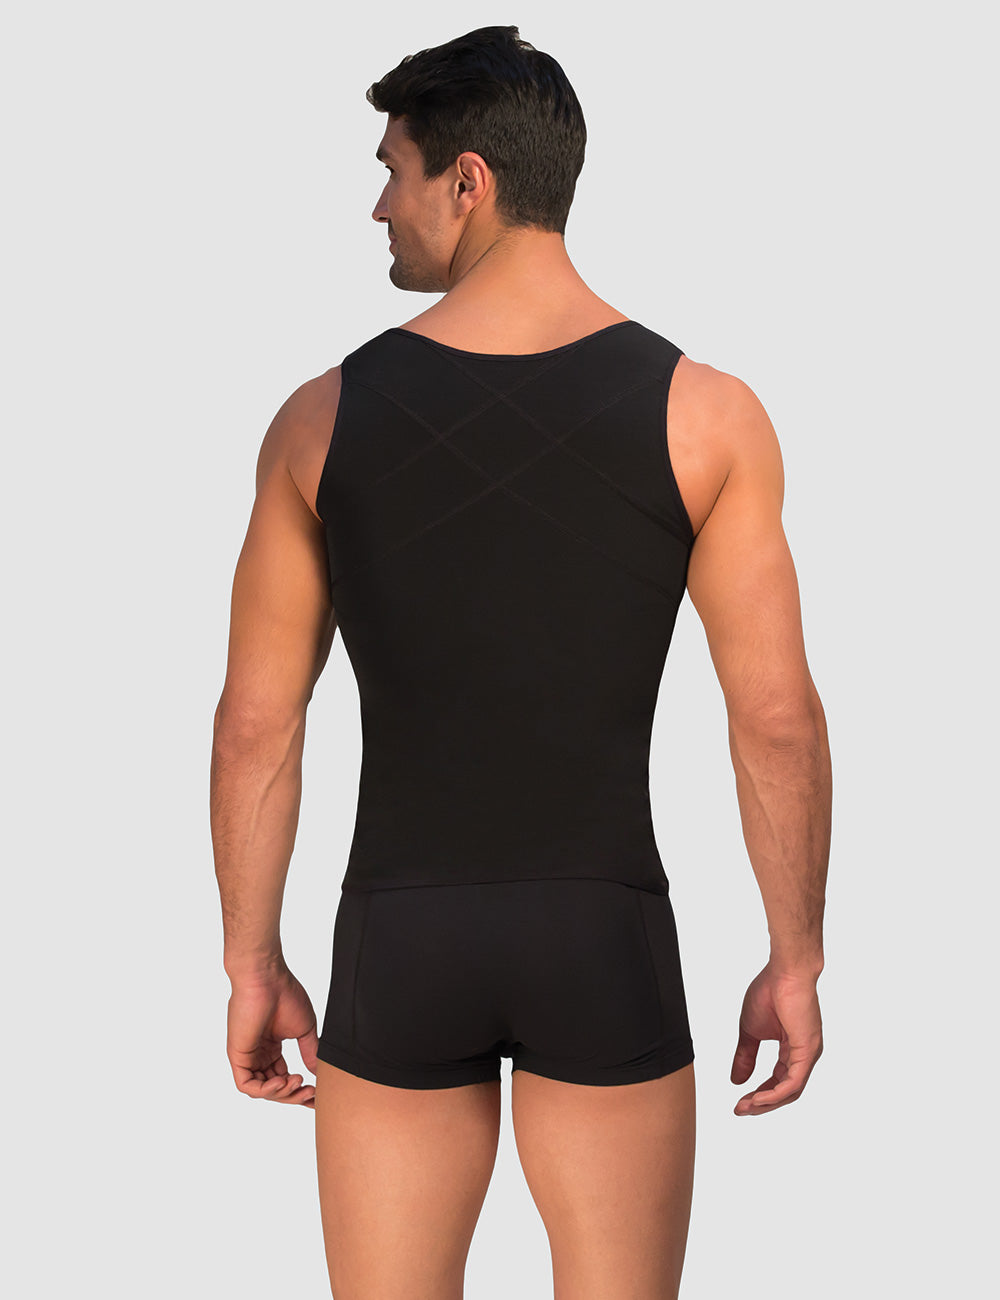 Compression Body Sculpting Underwear Vest with Hook and Zipper for